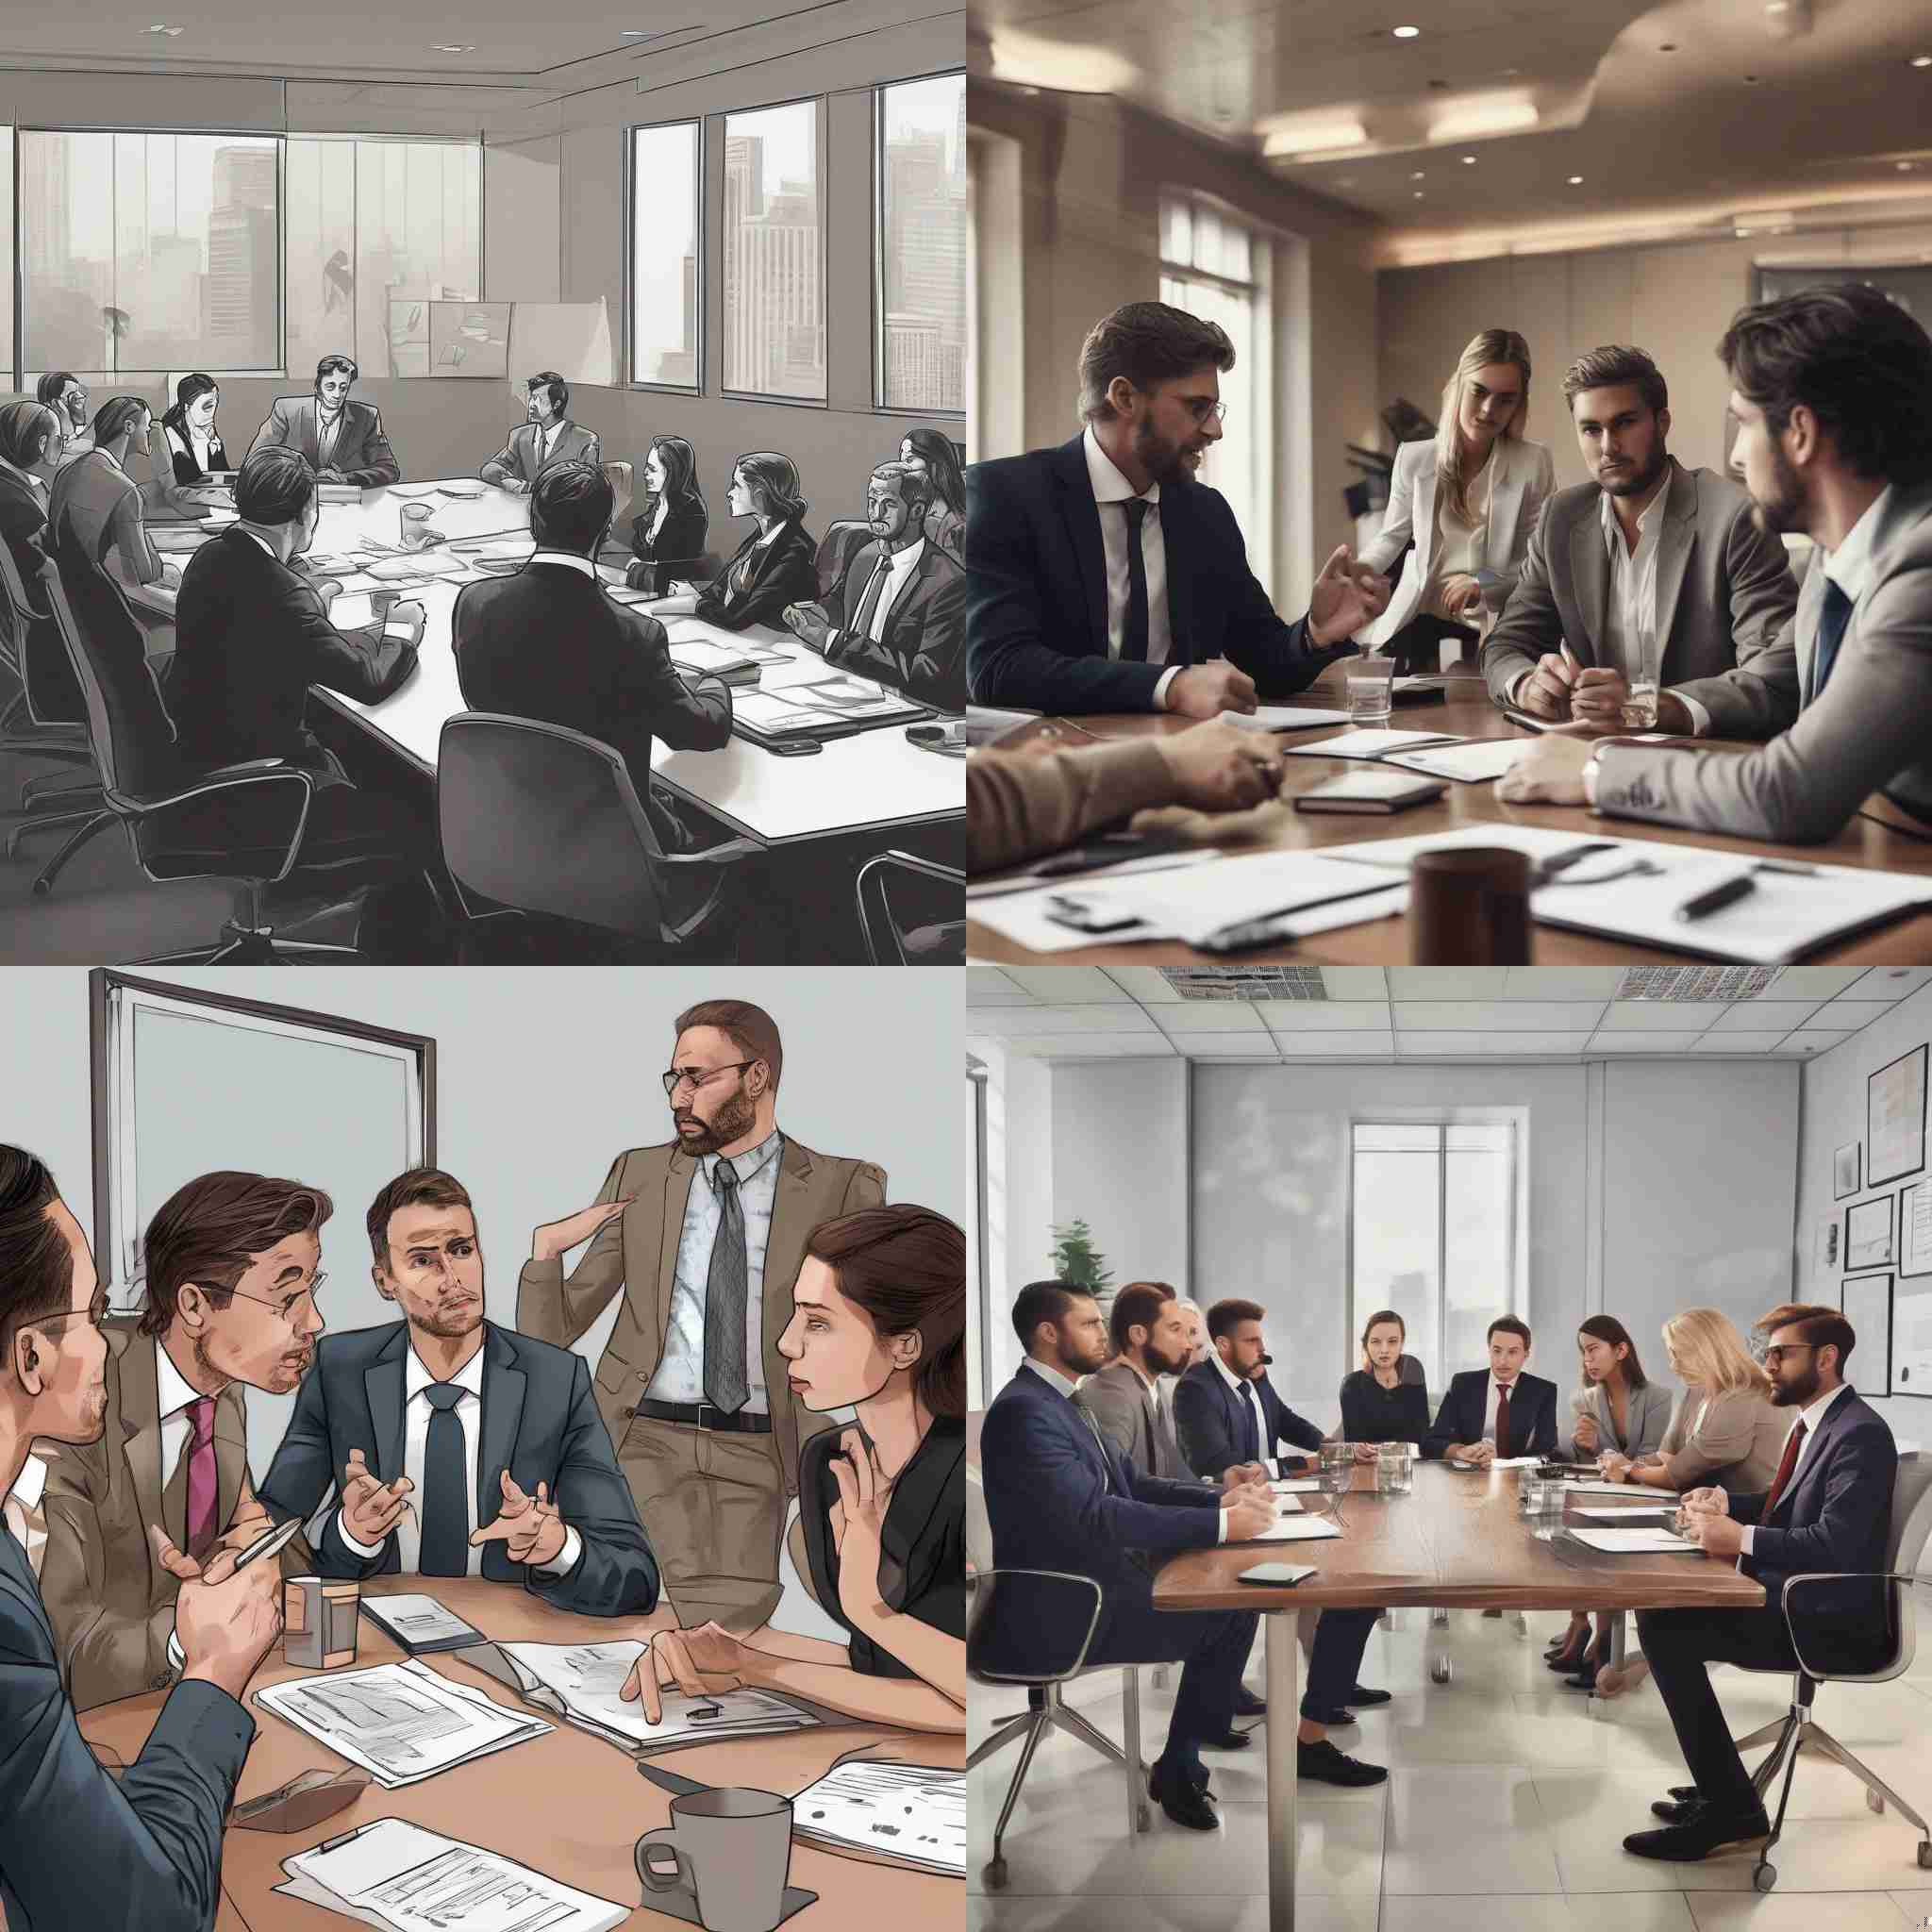 People in a business meeting